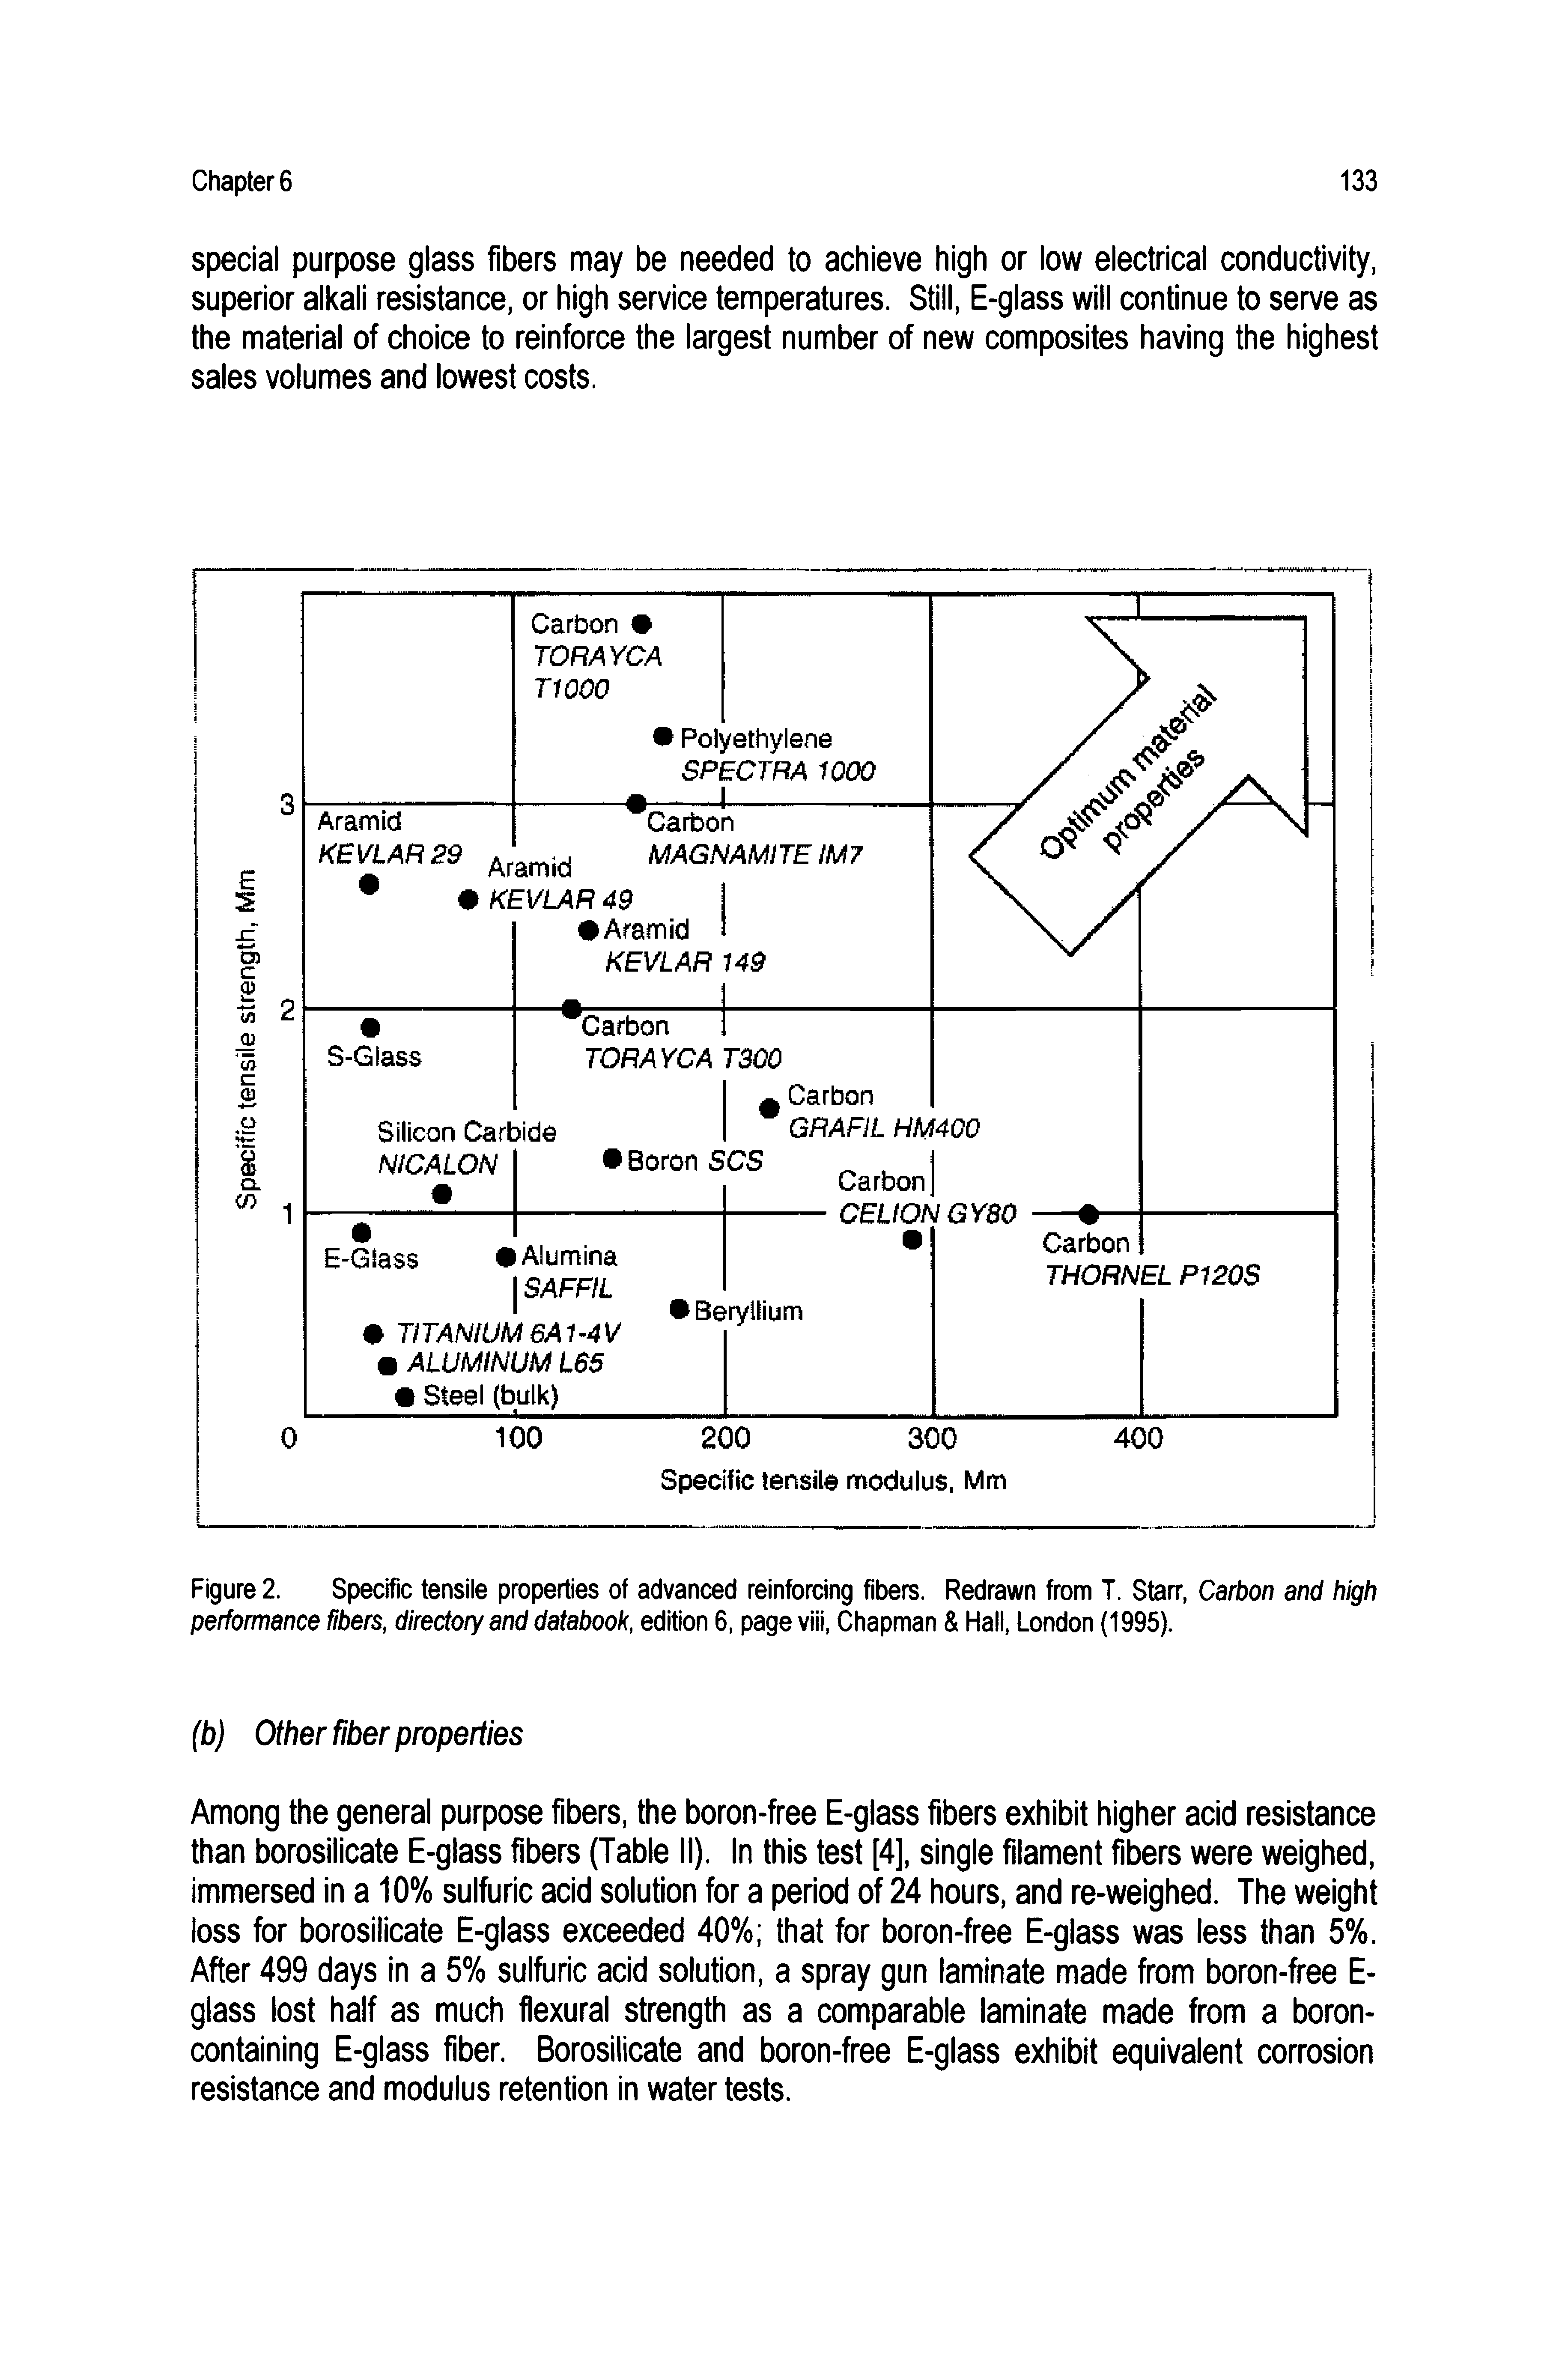 Figure 2. Specific tensile properties of advanced reinforcing fibers. Redrawn from T. Starr, Carbon and high performance fibers, directory and databook, edition 6, page viii, Chapman Hall, London (1995).